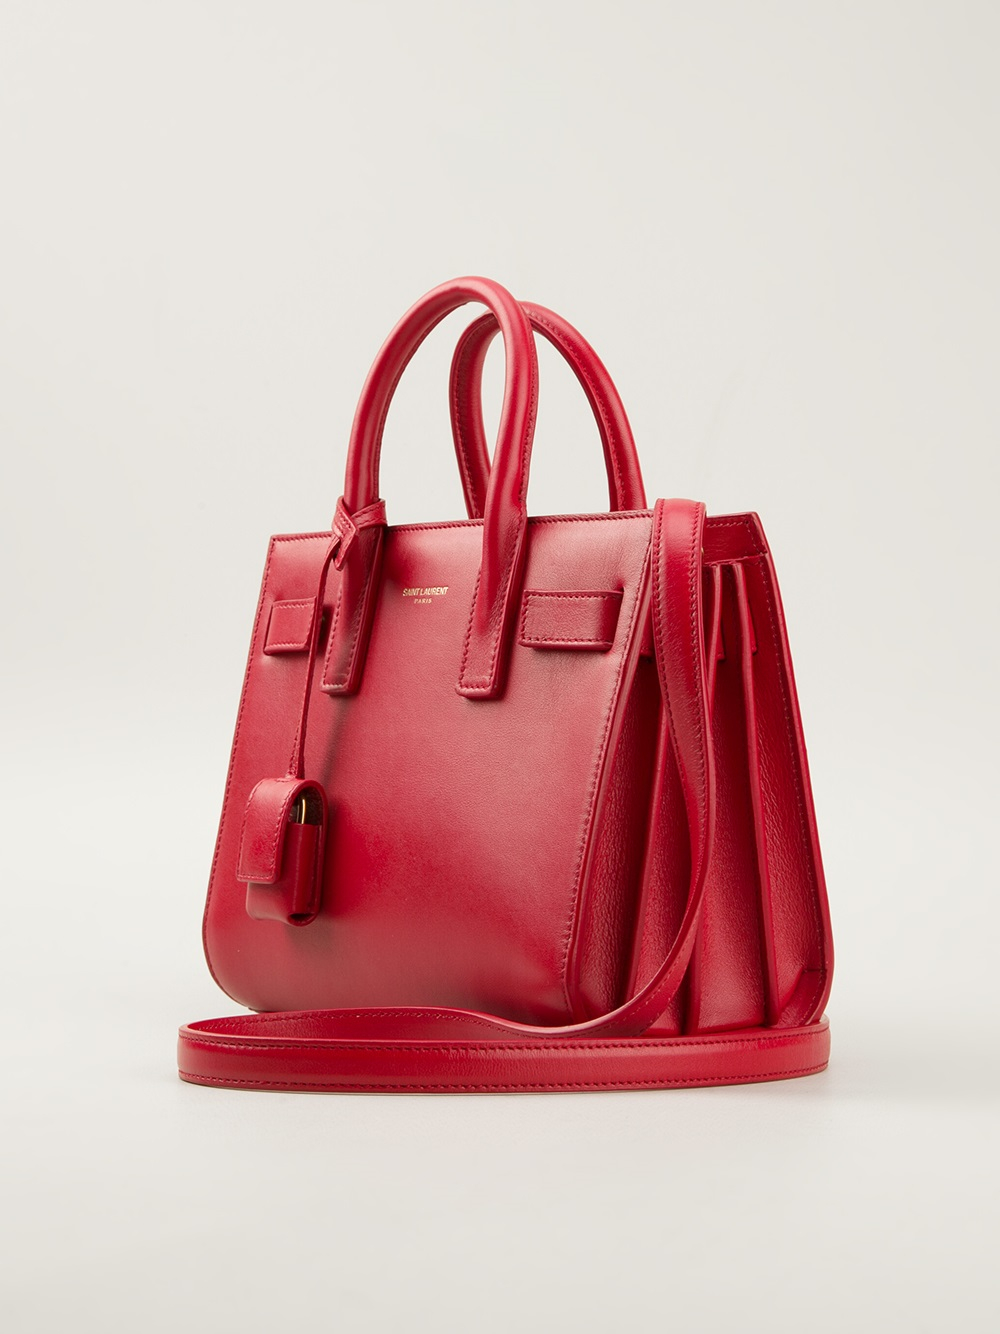 Saint Laurent Leather 'classic Baby Sac De Jour' Tote Bag in Red - Lyst